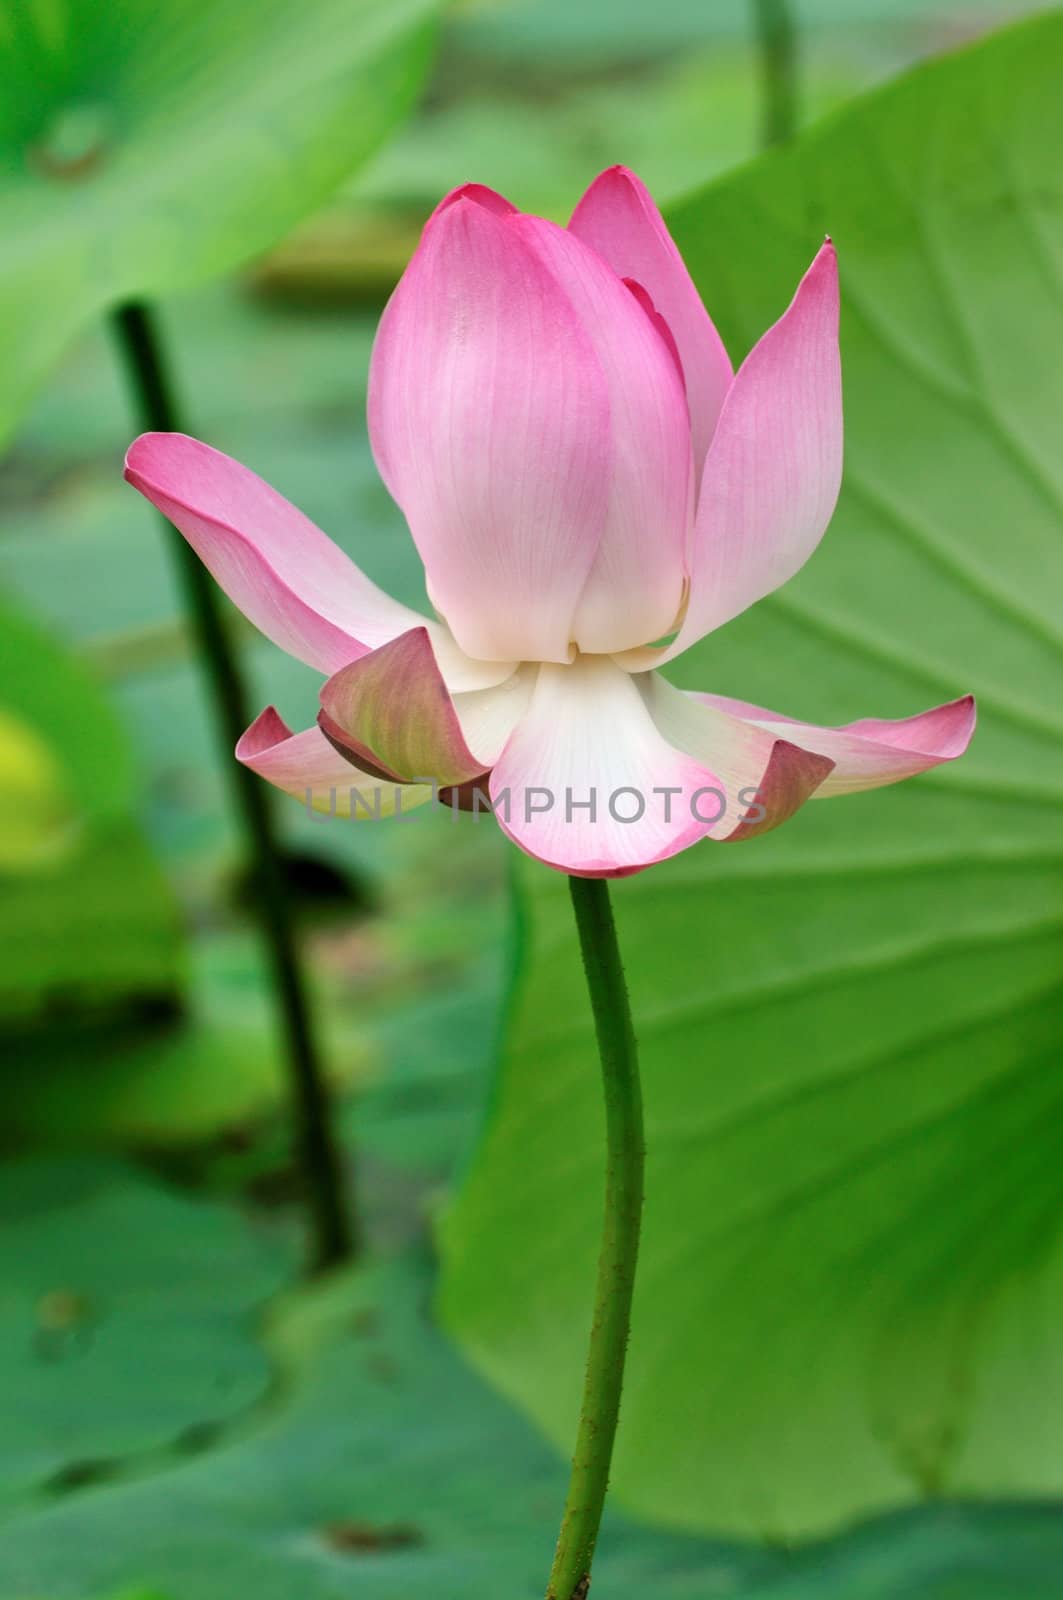 Fresh young lotus bud at a local pond